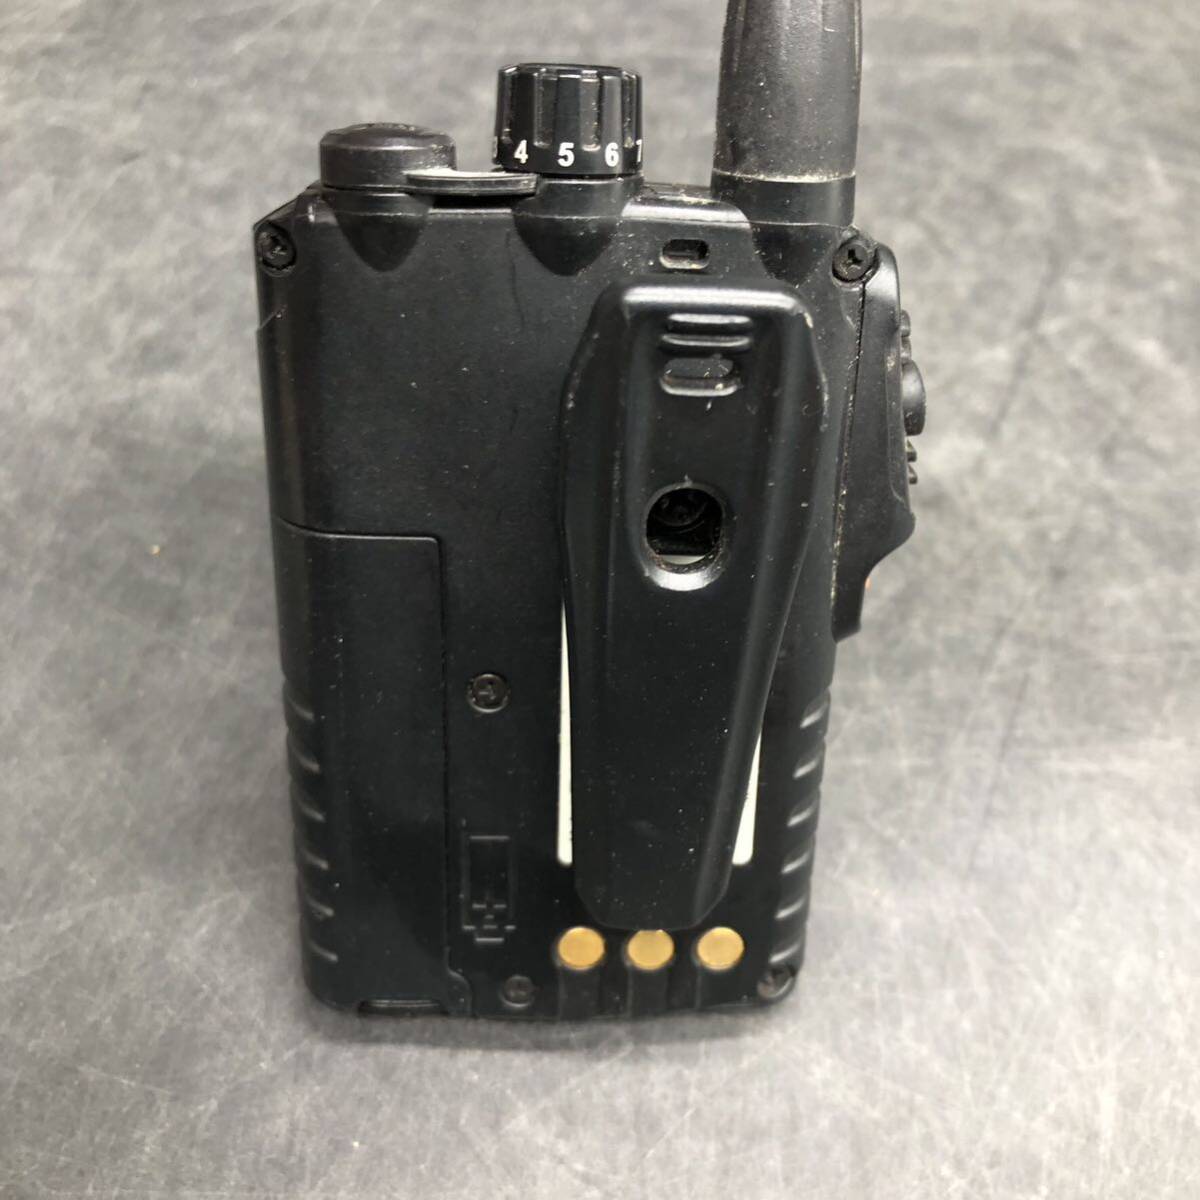 668 special small electric power transceiver SR100A small size transceiver transceiver transceiver * present condition pick up 